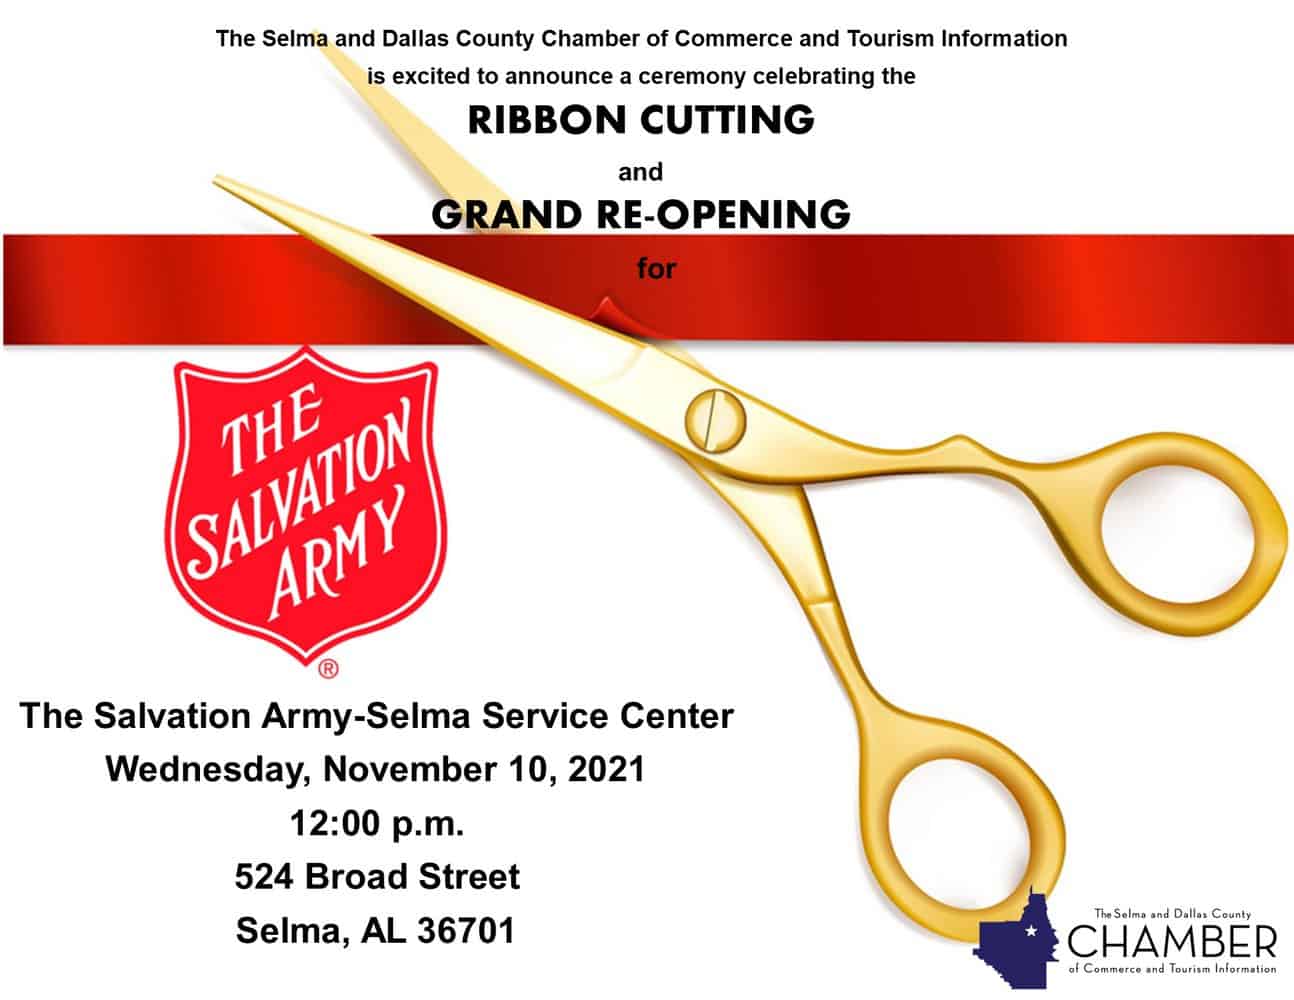 The_Salvation_Army_Grand_Re-Opening_Ribbon_Cutting_Celebration.jpg